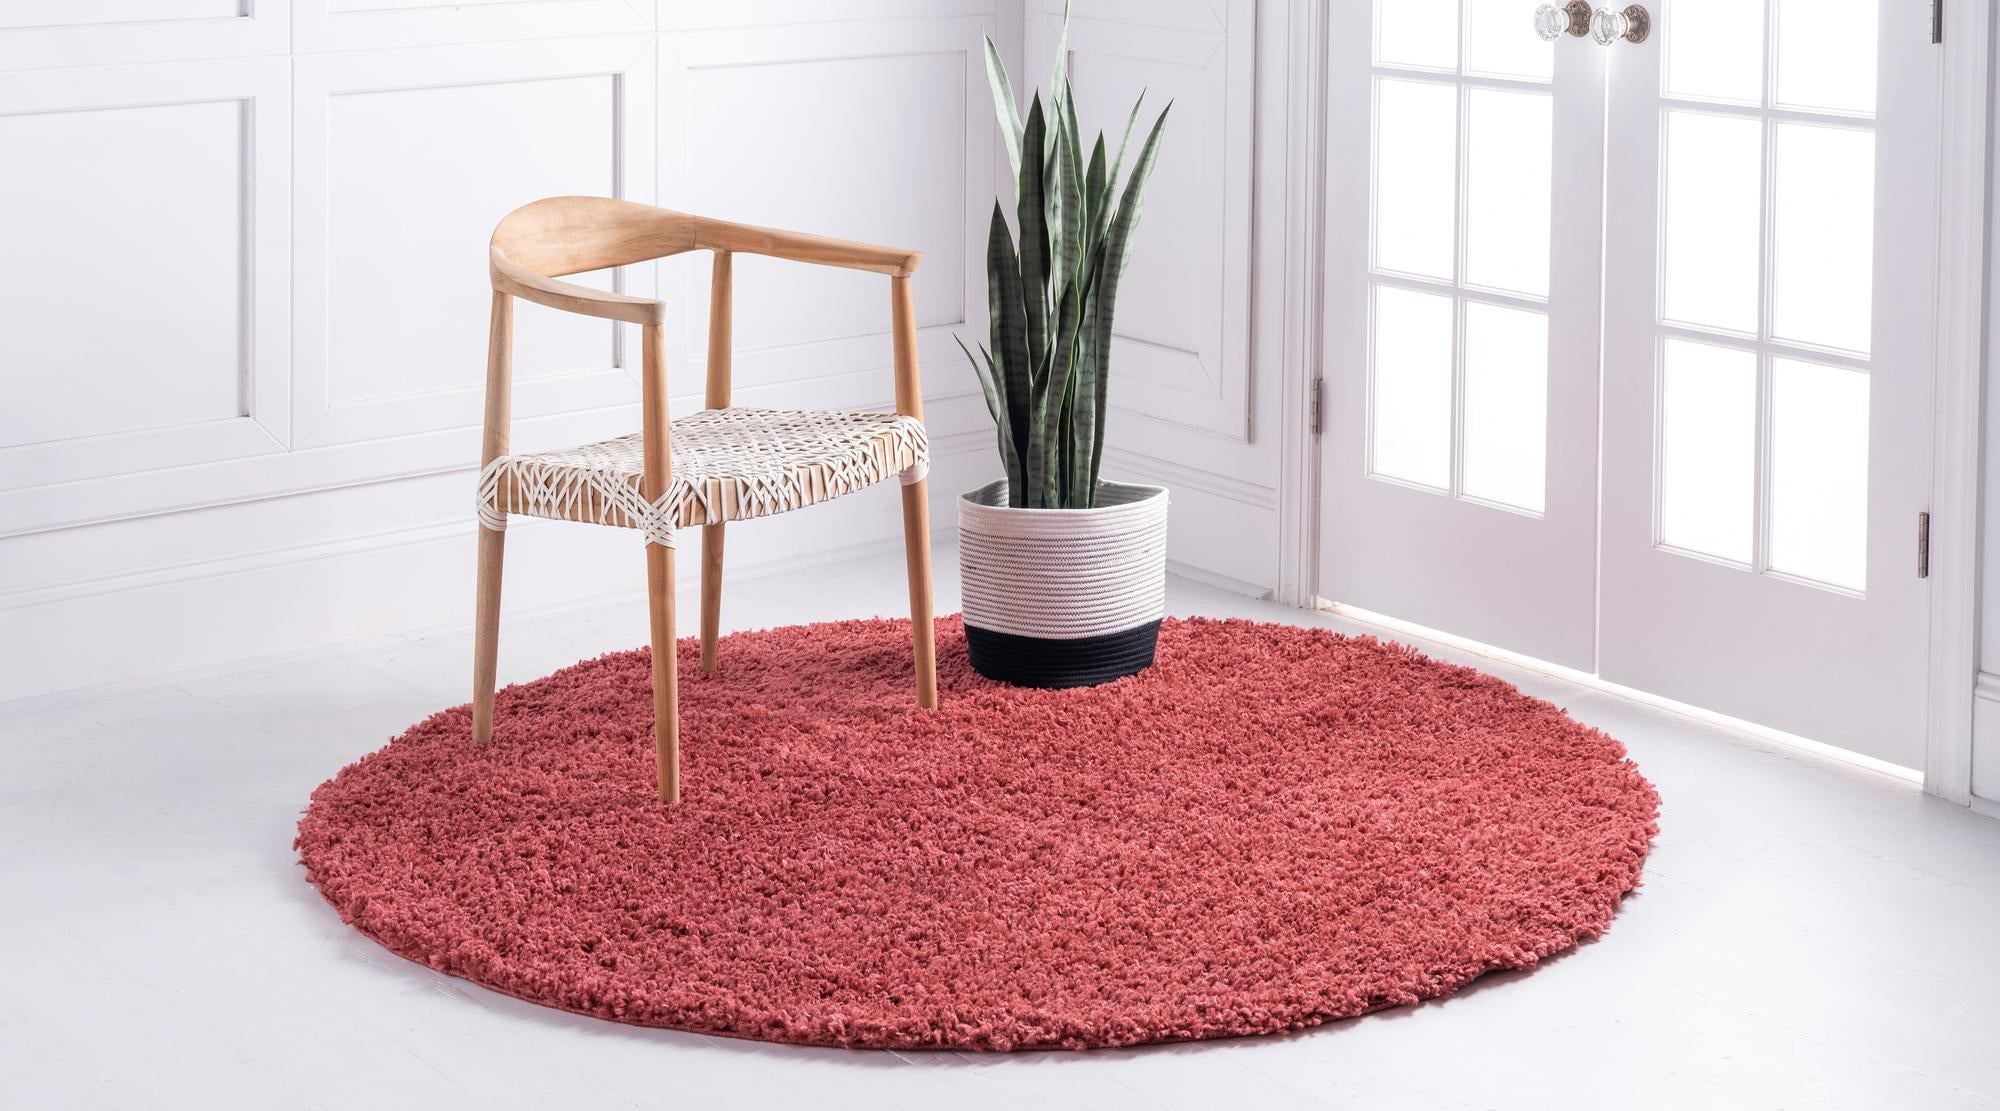 6'x9' Solid Shag Rug Cherry Red - Unique Loom